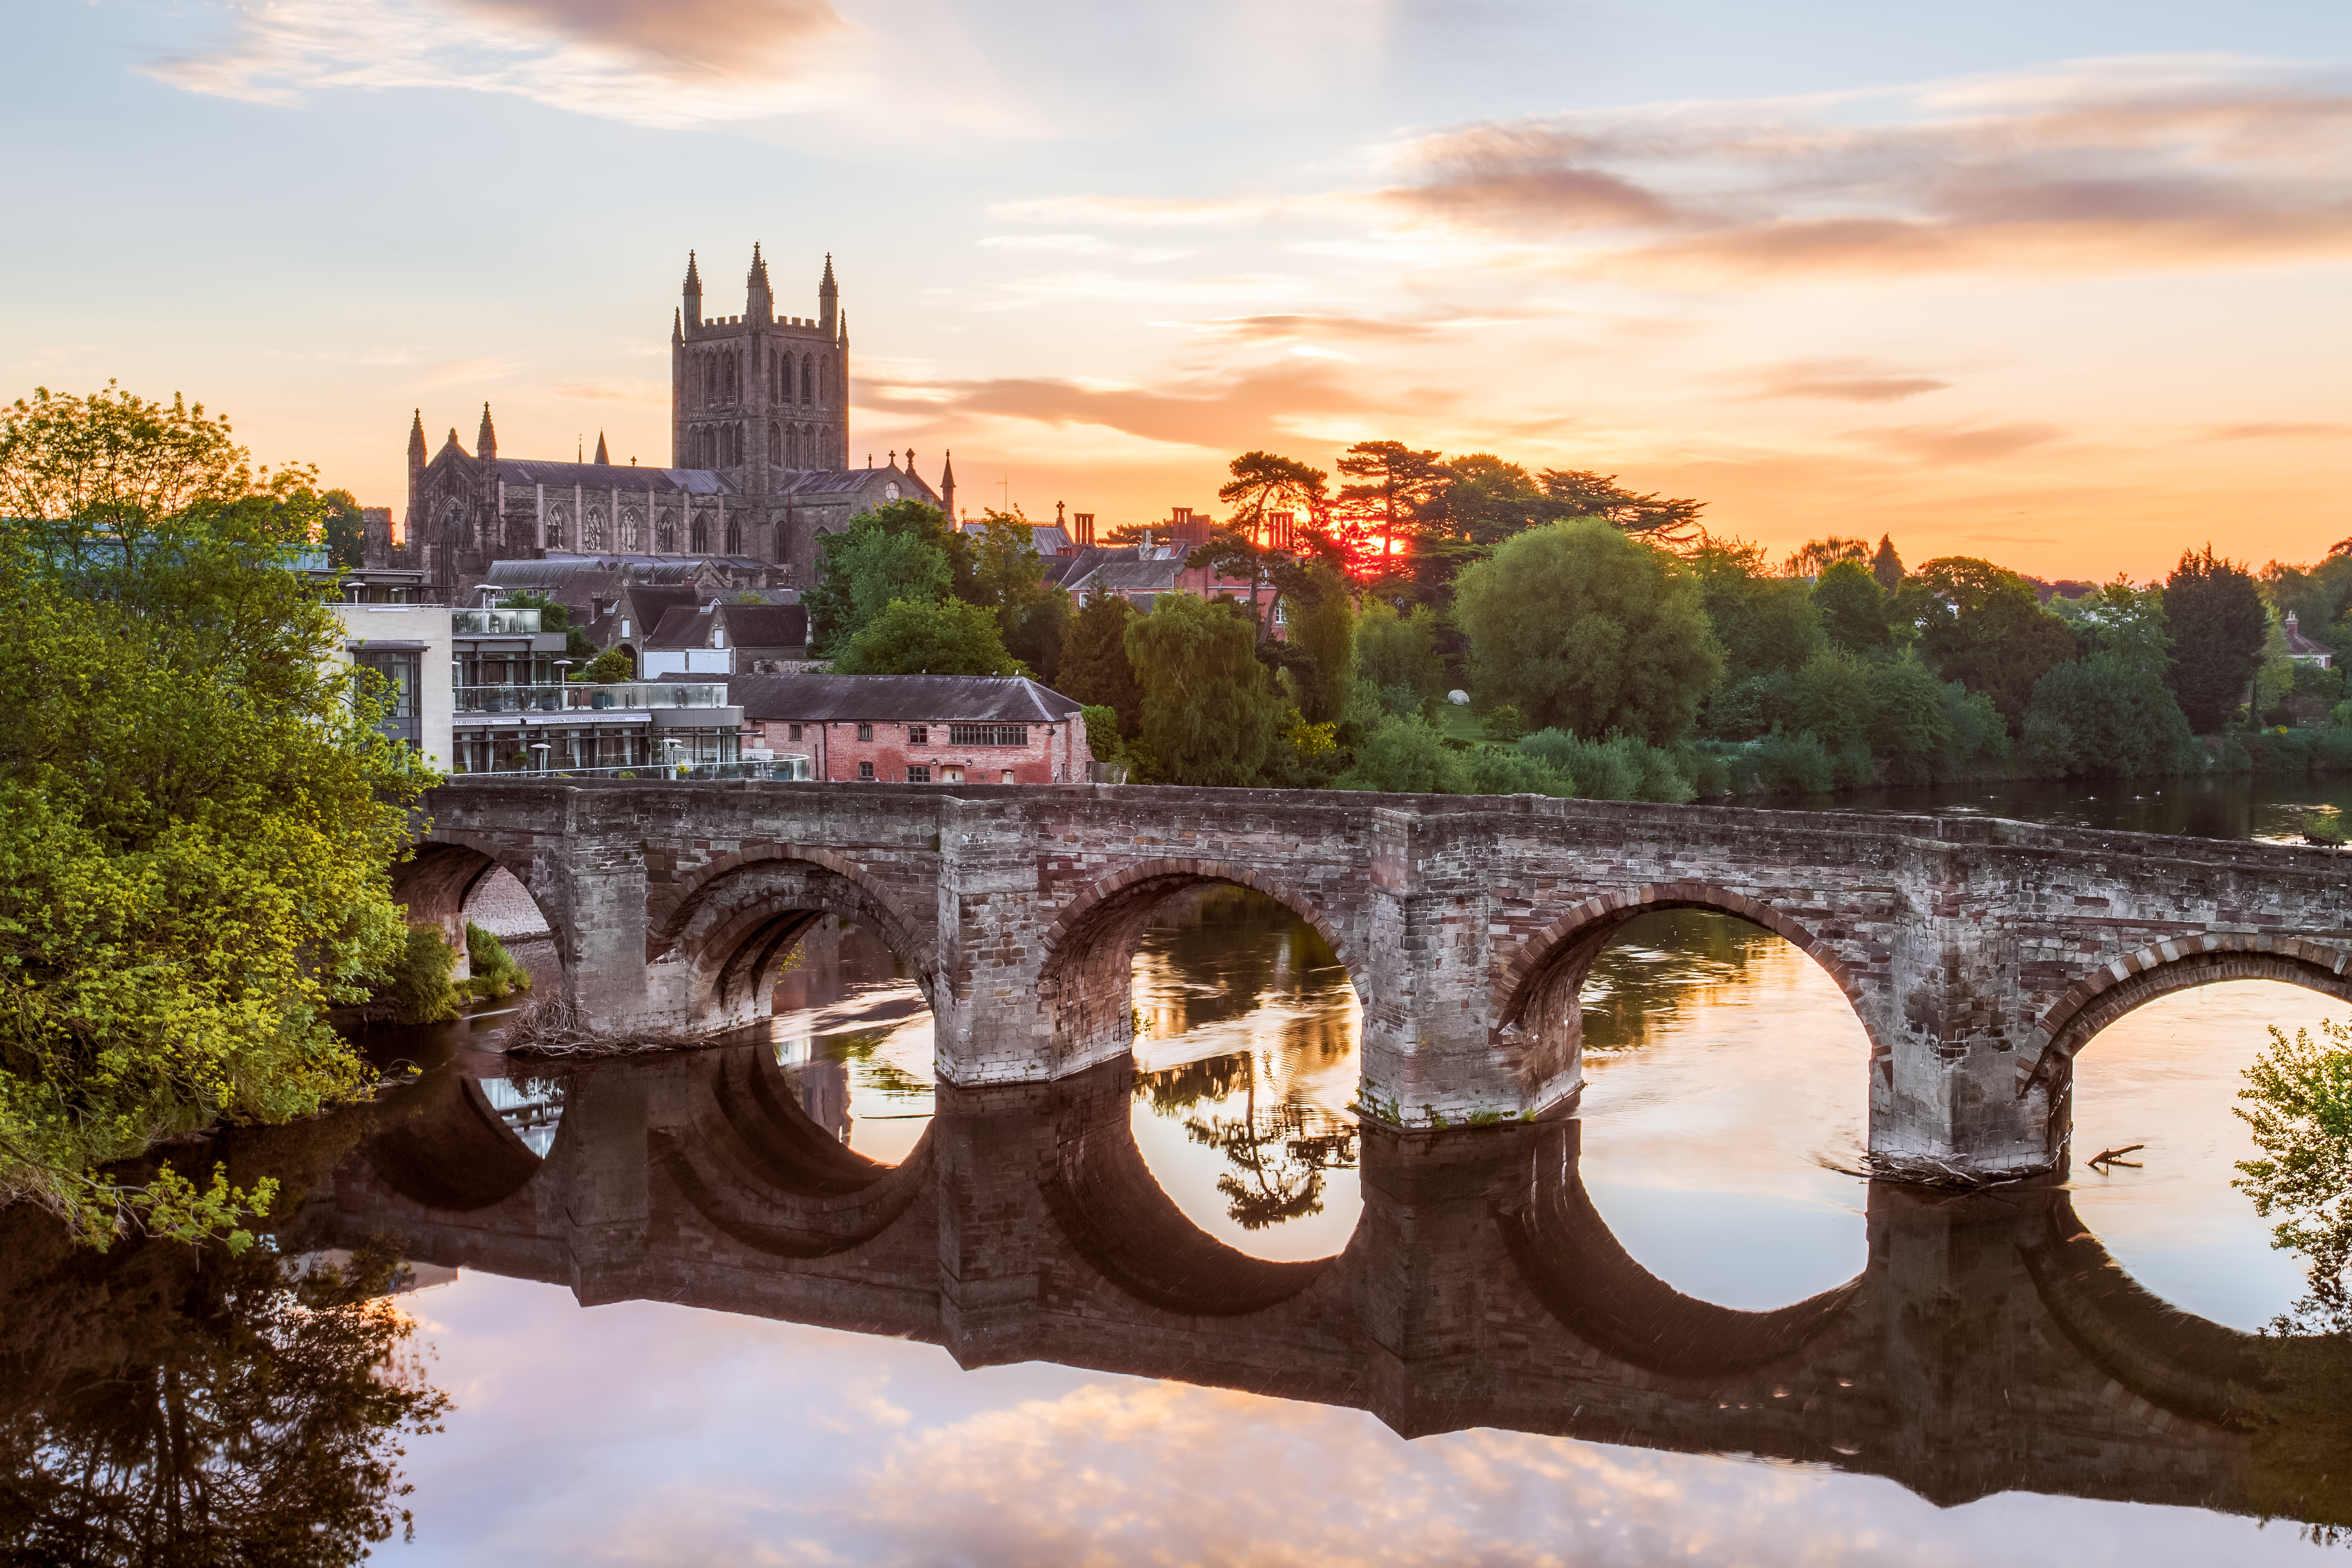 The River Wye crossed by a stone bridge and Hereford Cathedral in the near distance 